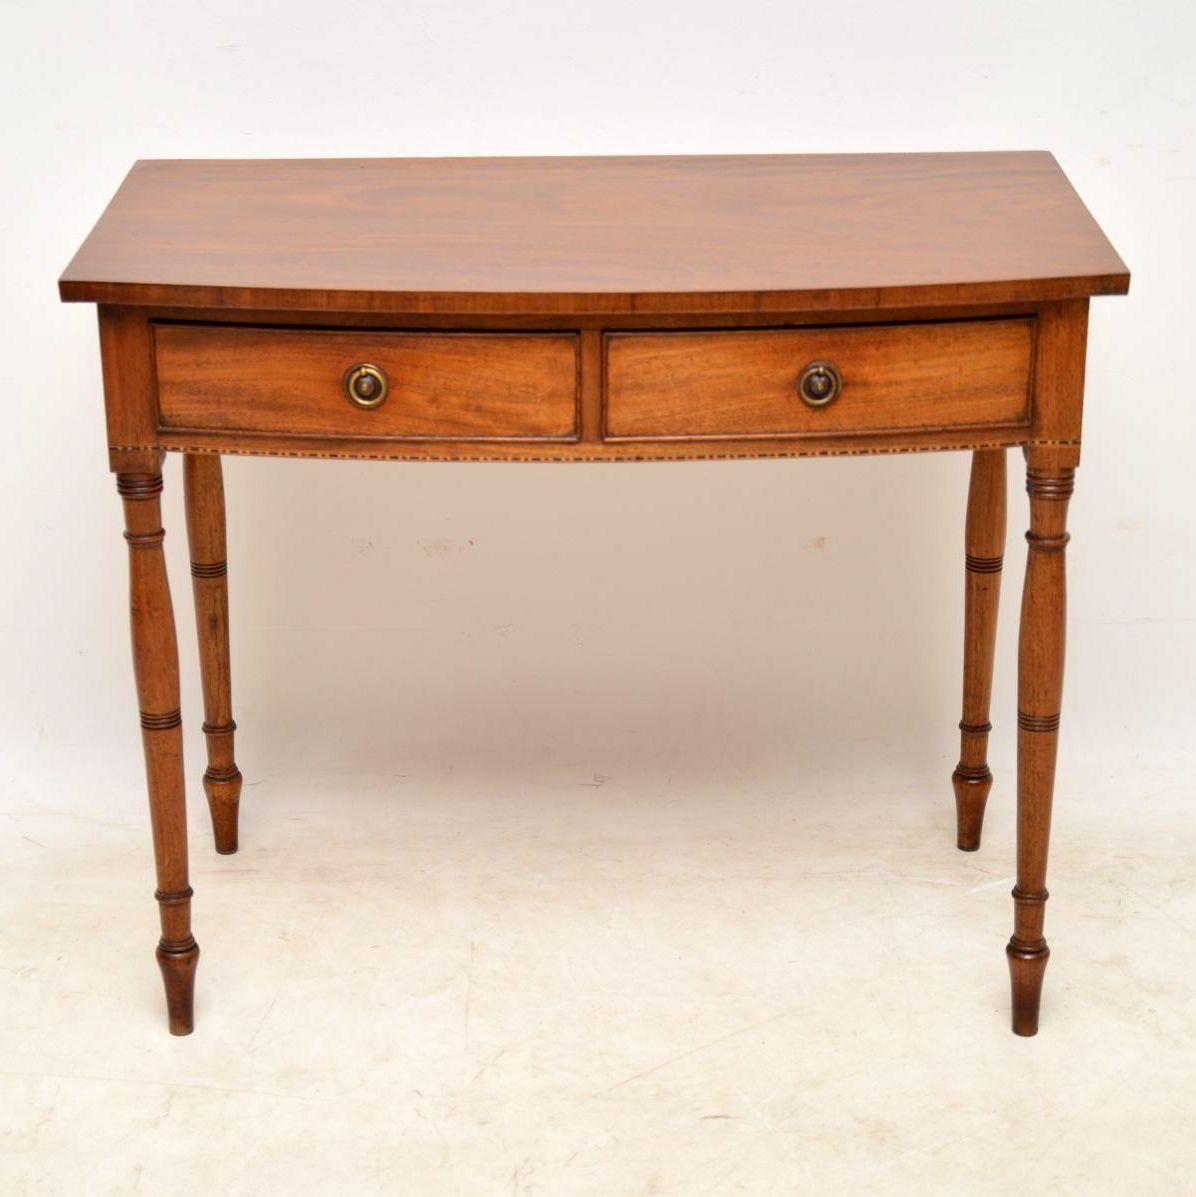 Antique Georgian period mahogany writing table or side table, dating from around the 1810-1830s period. It’s in excellent condition and has a nice original colour. This delightful table is bow fronted, with two finely dovetailed drawers that have